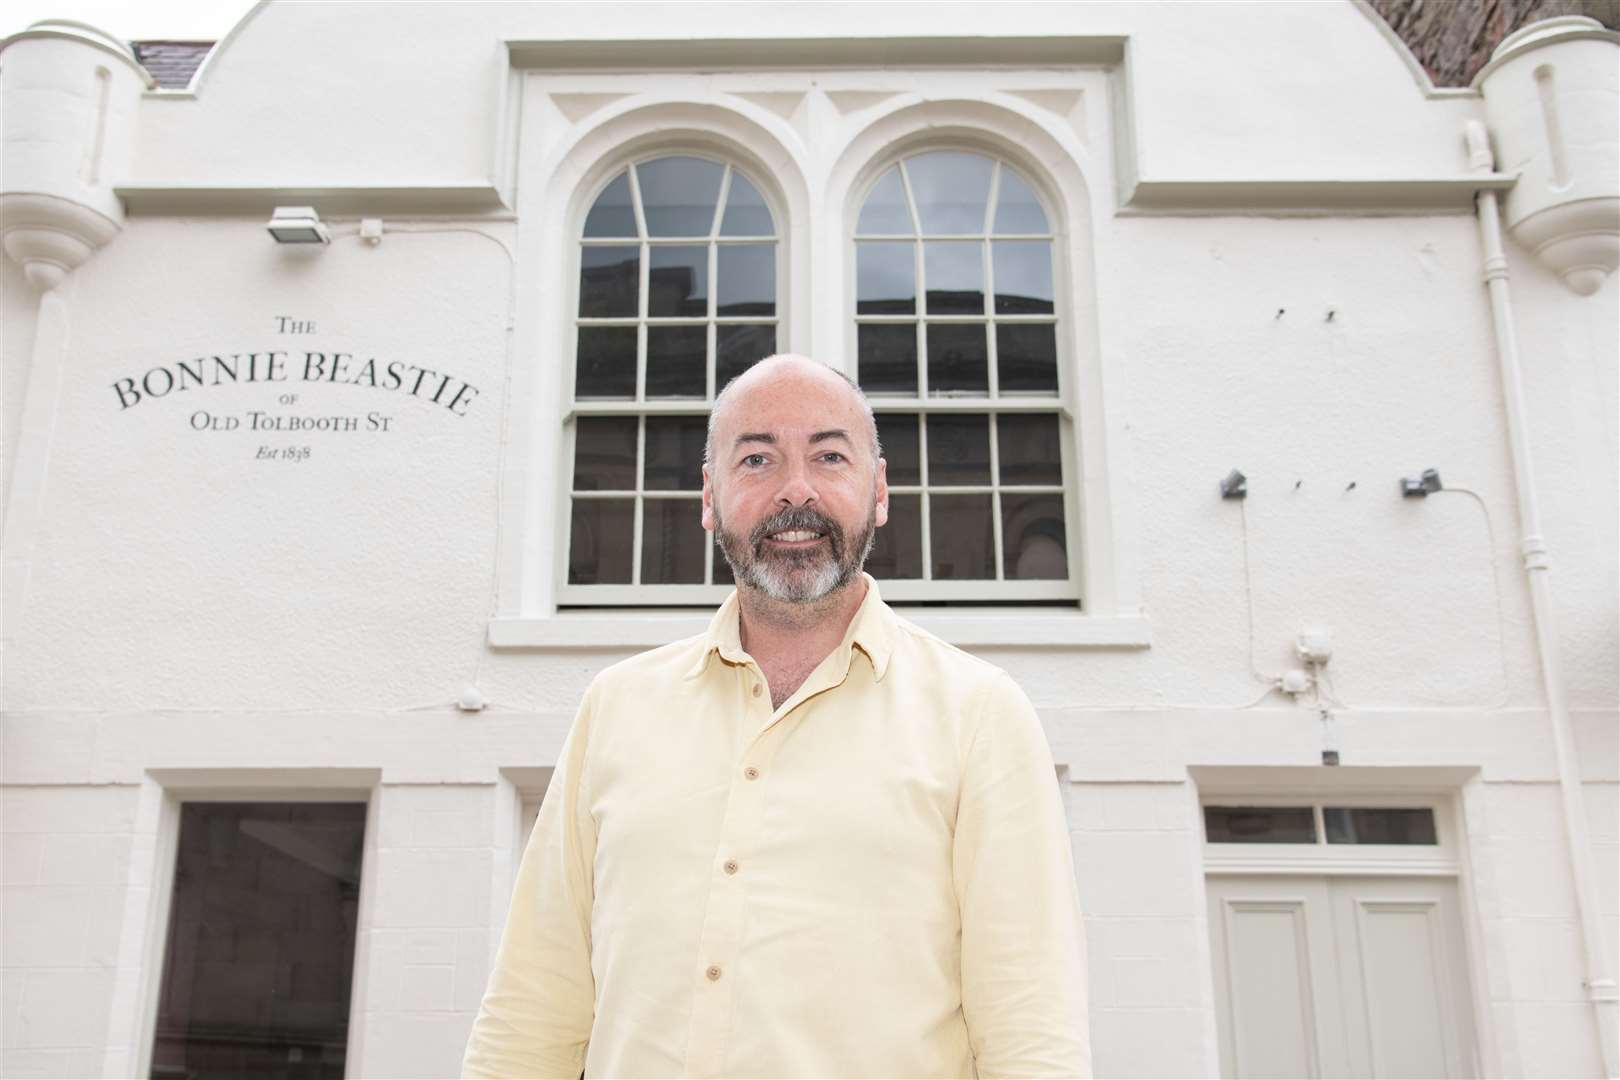 Owner Kevin Smith outside of the Bonnie Beastie. Picture: Daniel Forsyth